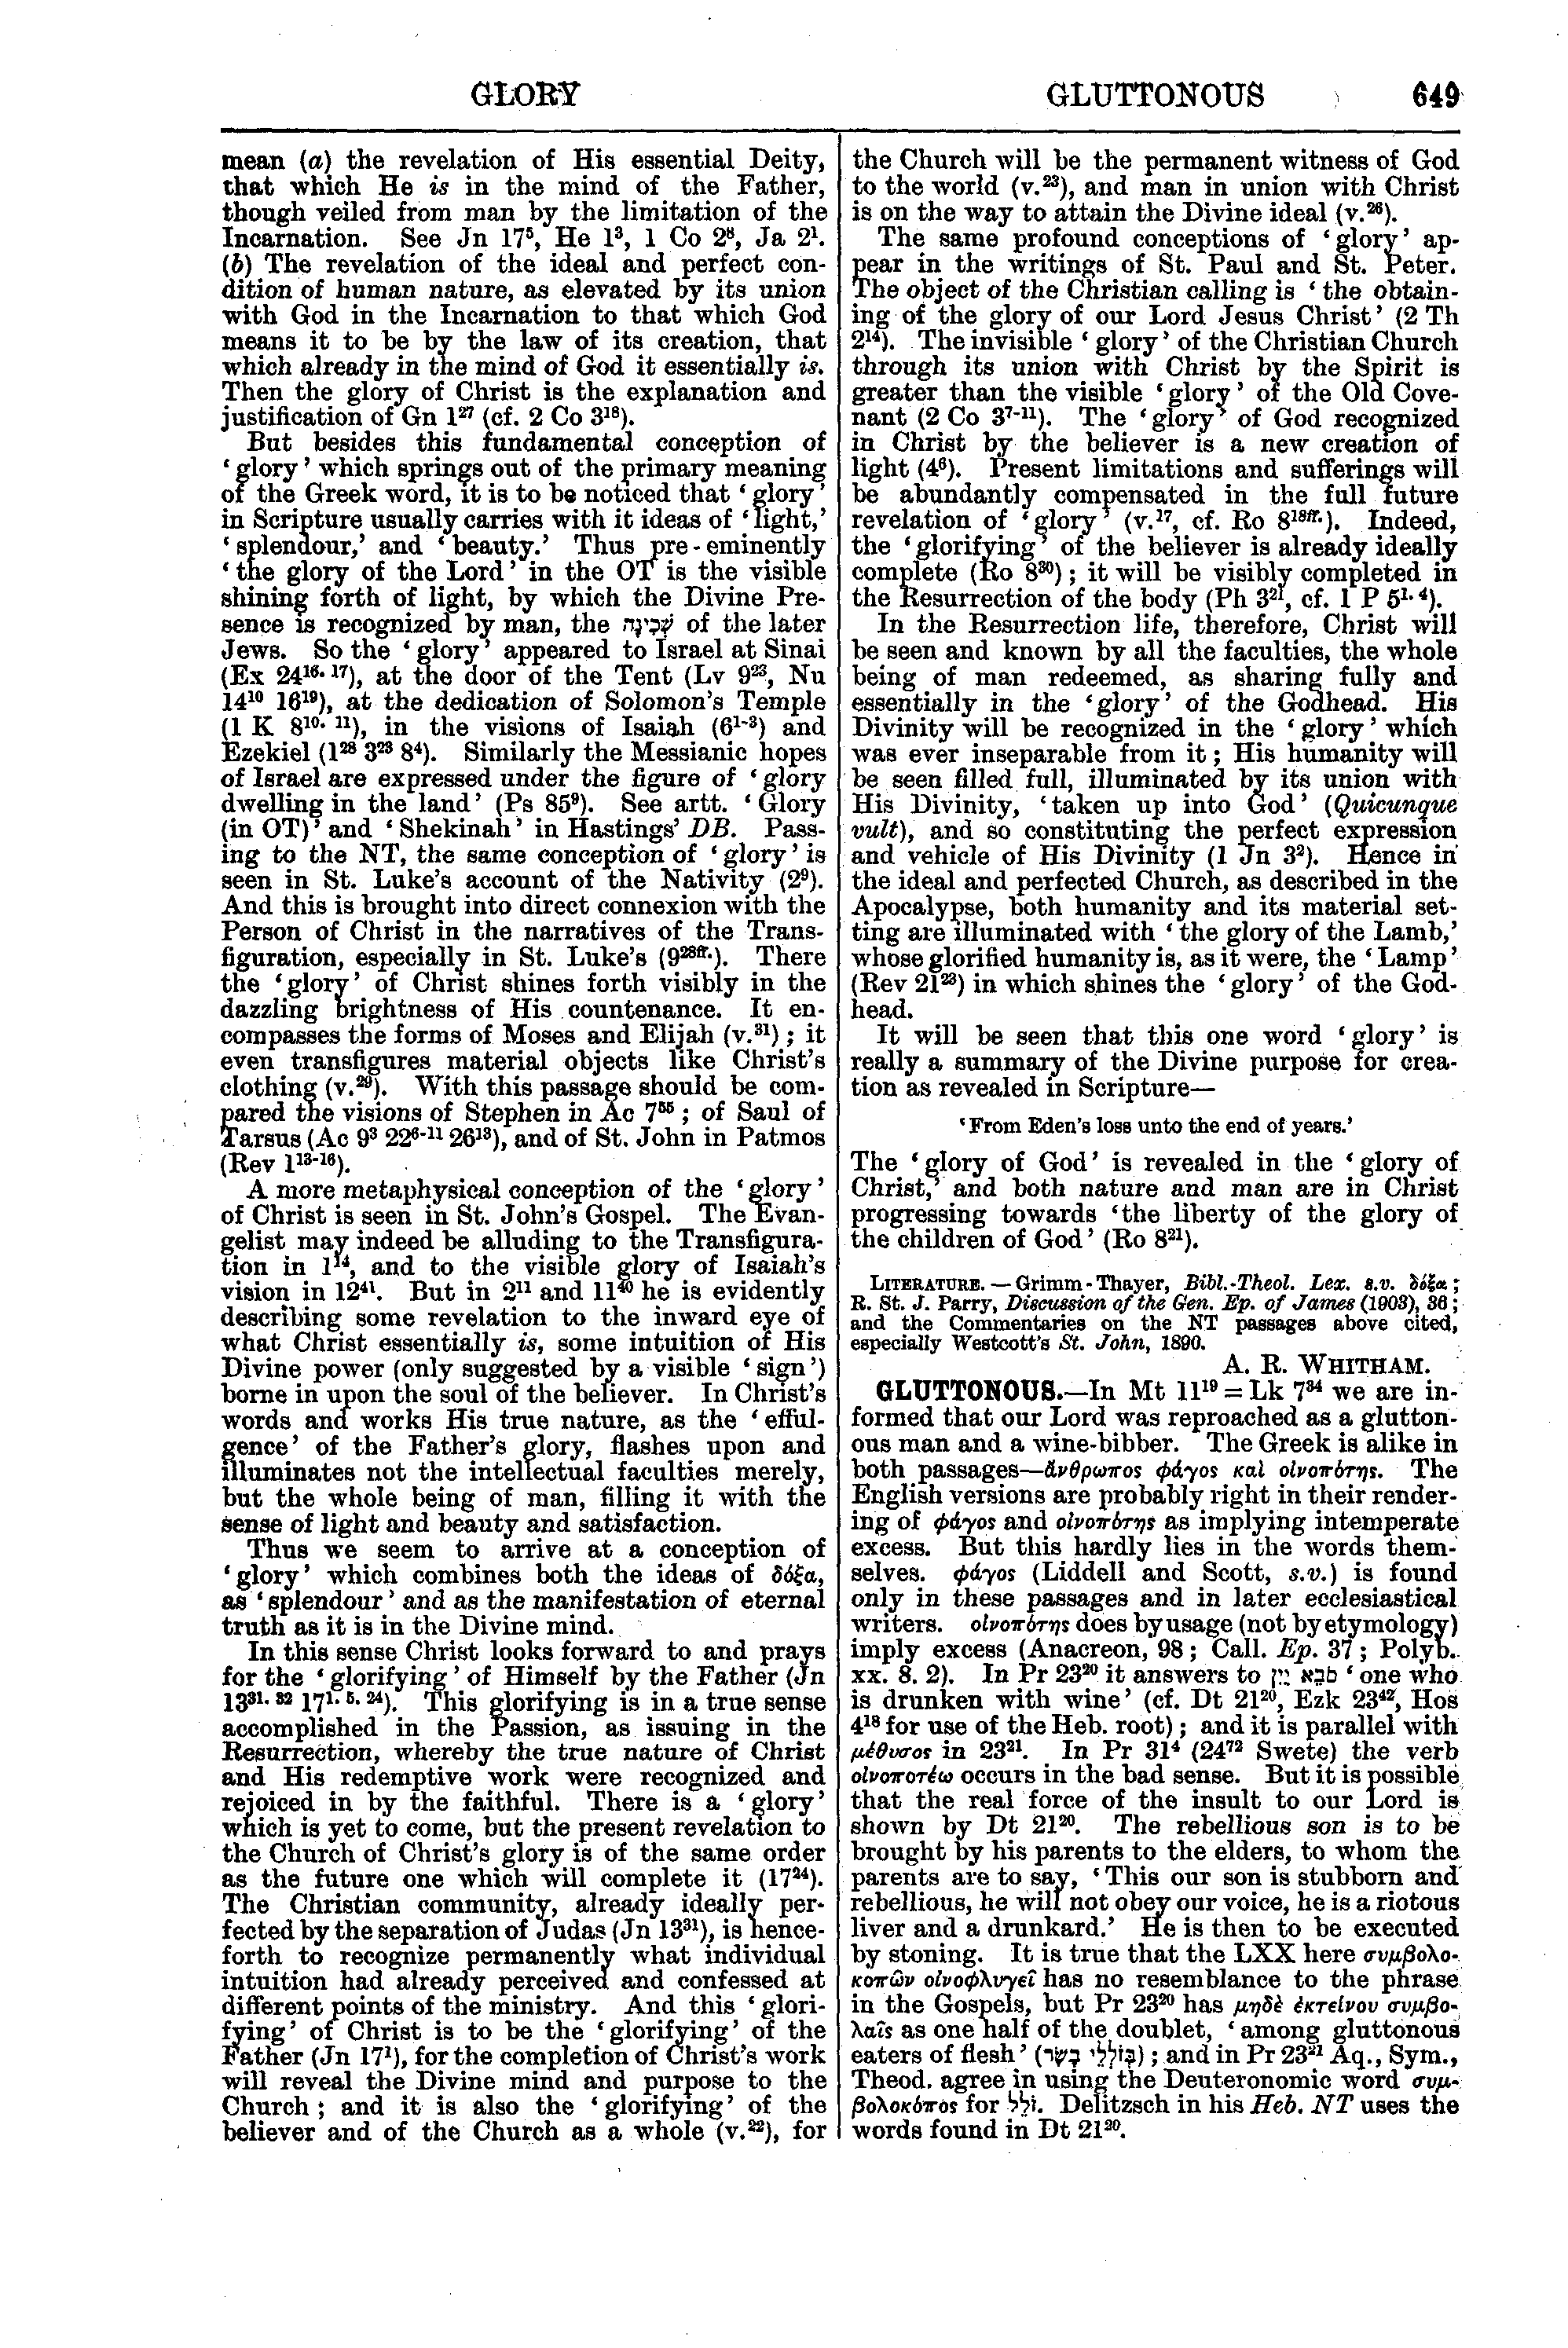 Image of page 649